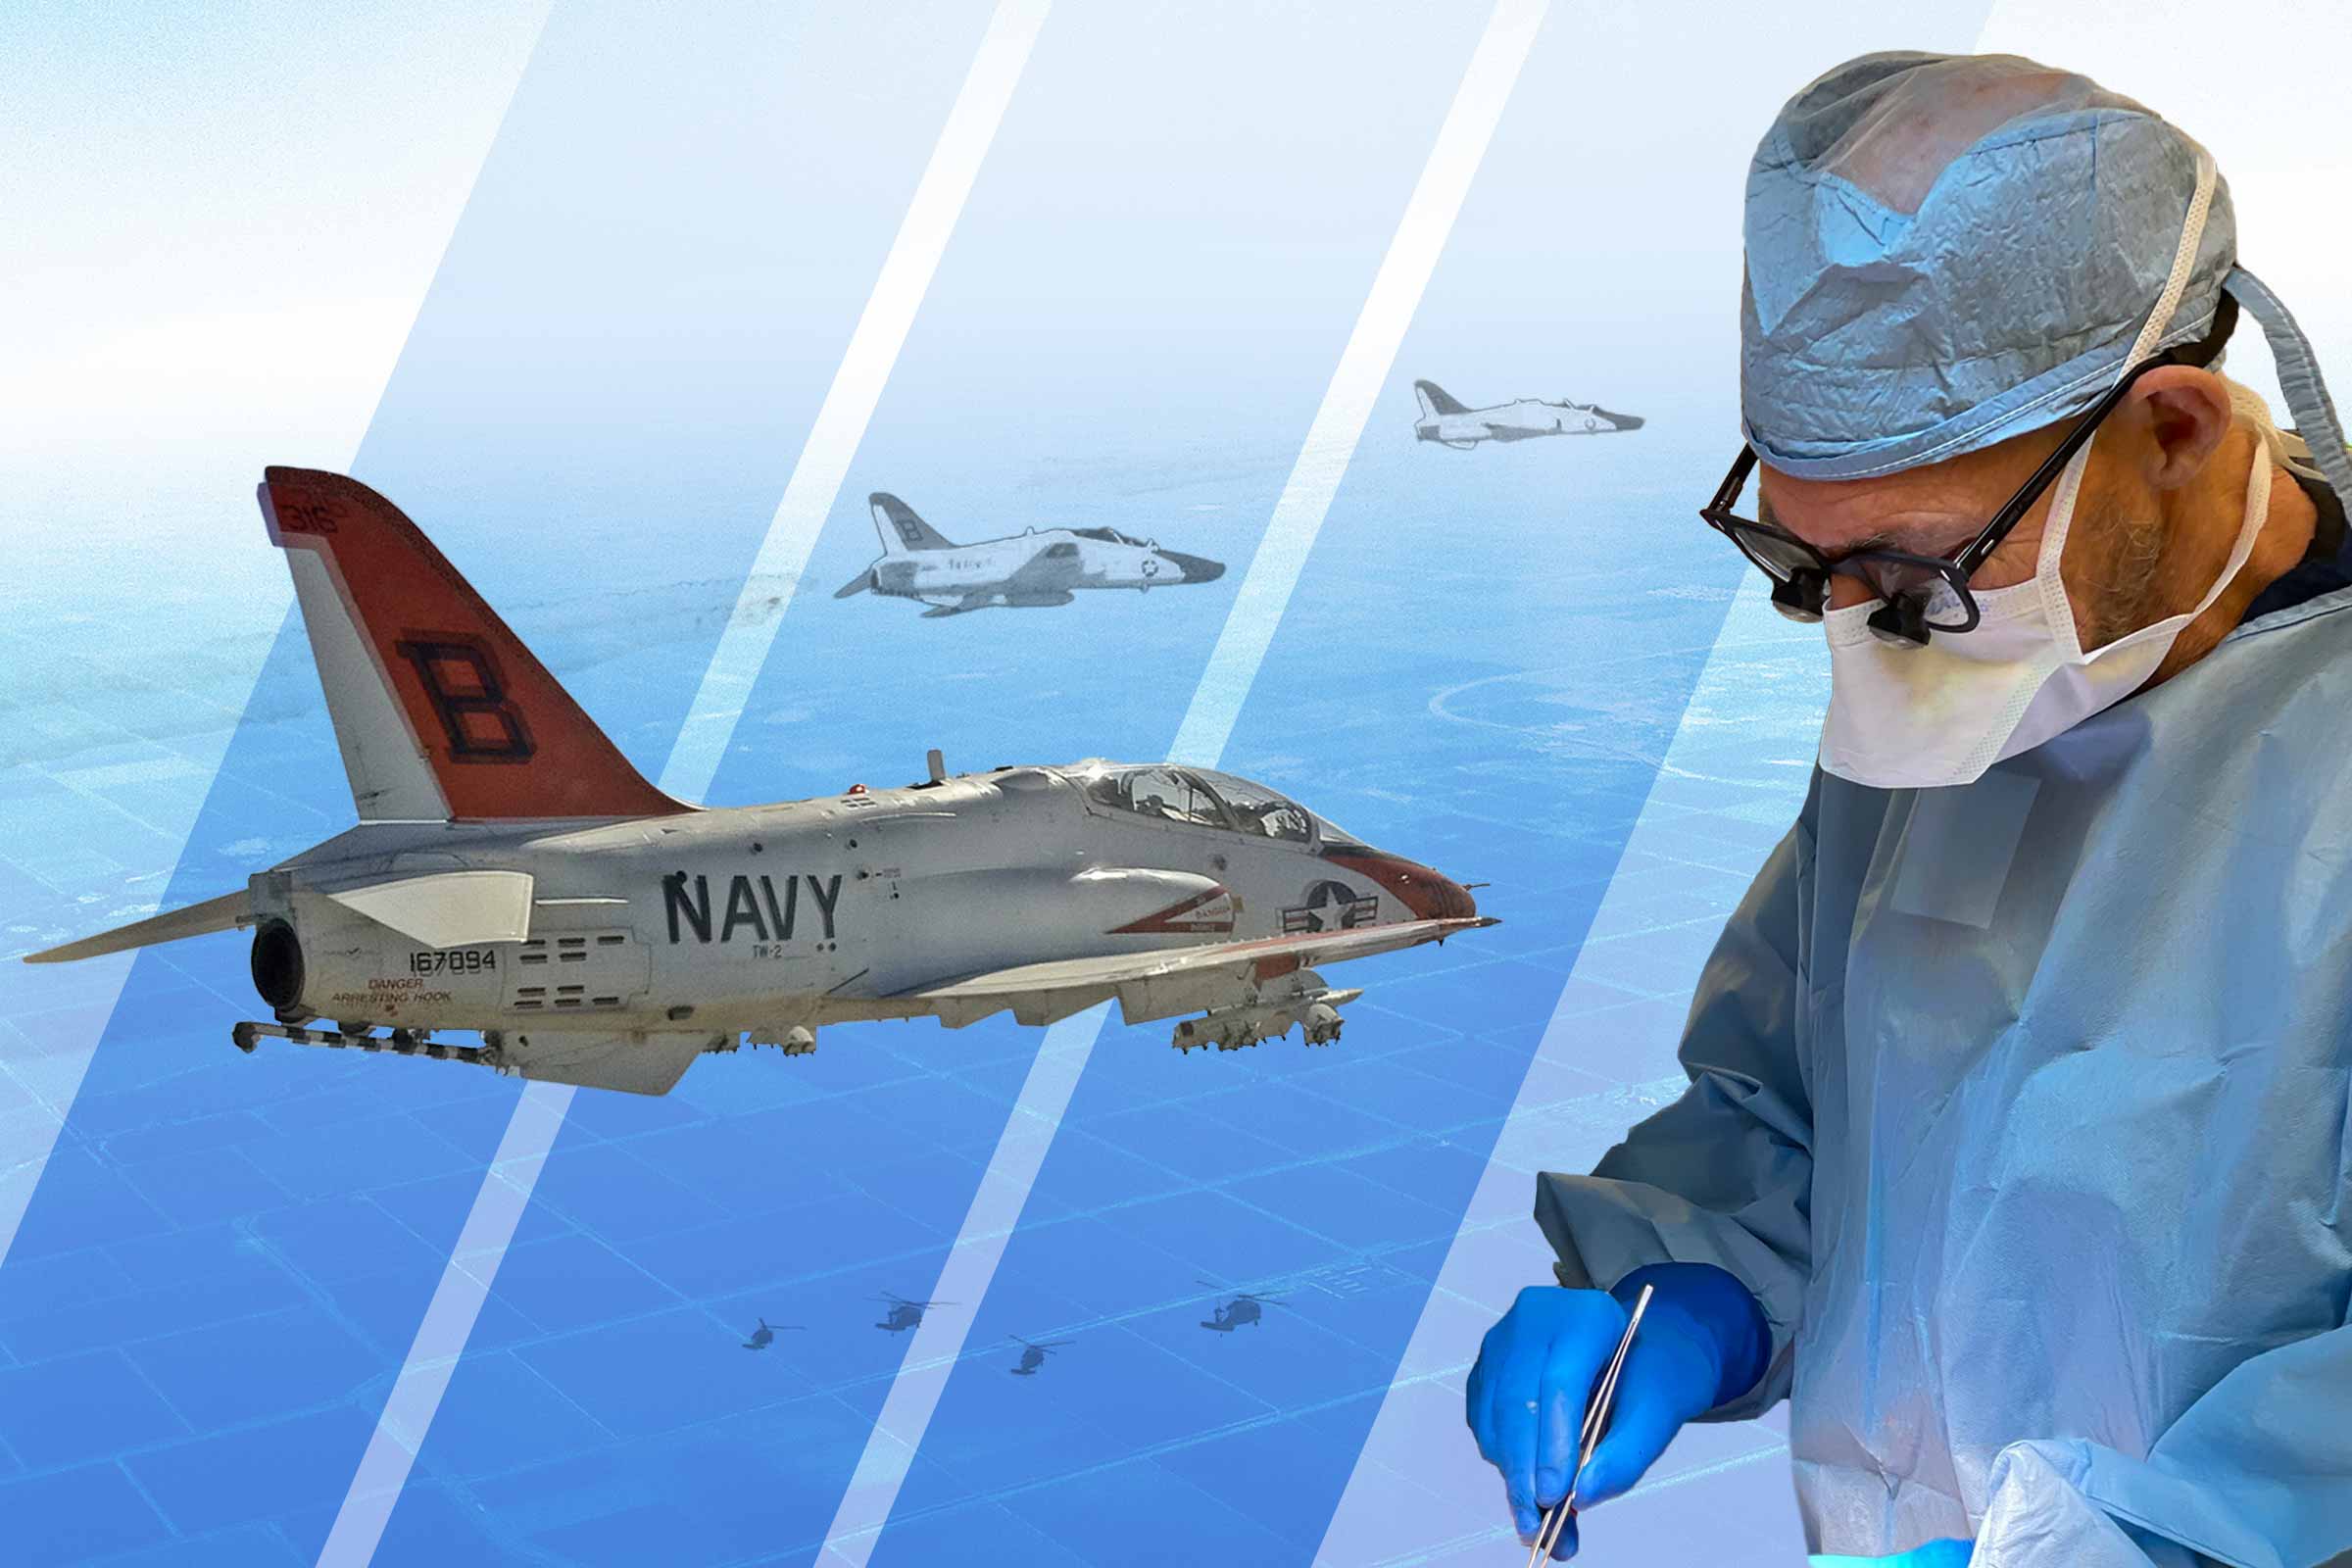 Photo collage of military tactical jets and helicopters with an image of Dr. James Thorton performing a surgical procedure in an operating room